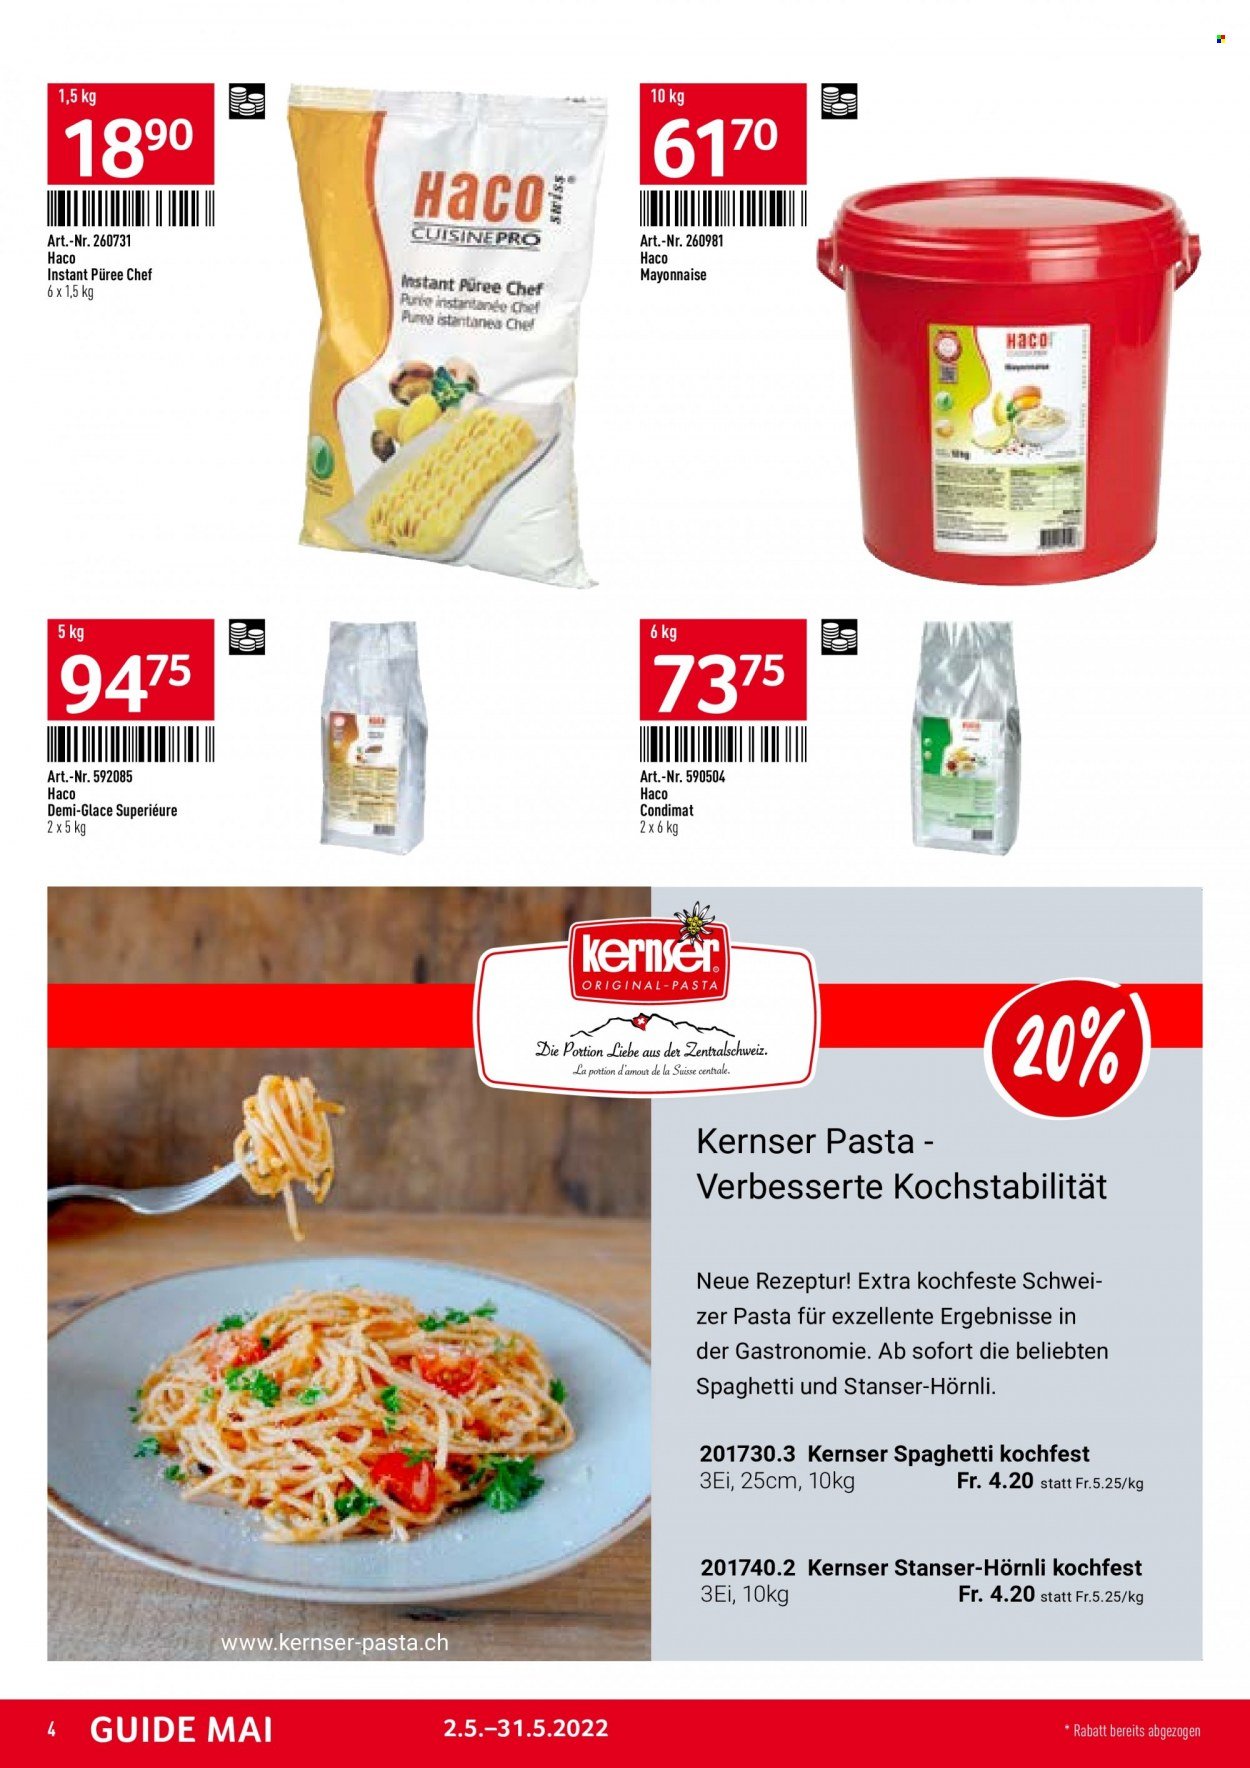 Catalogue TransGourmet - 2.5.2022 - 31.5.2022. Page 4.